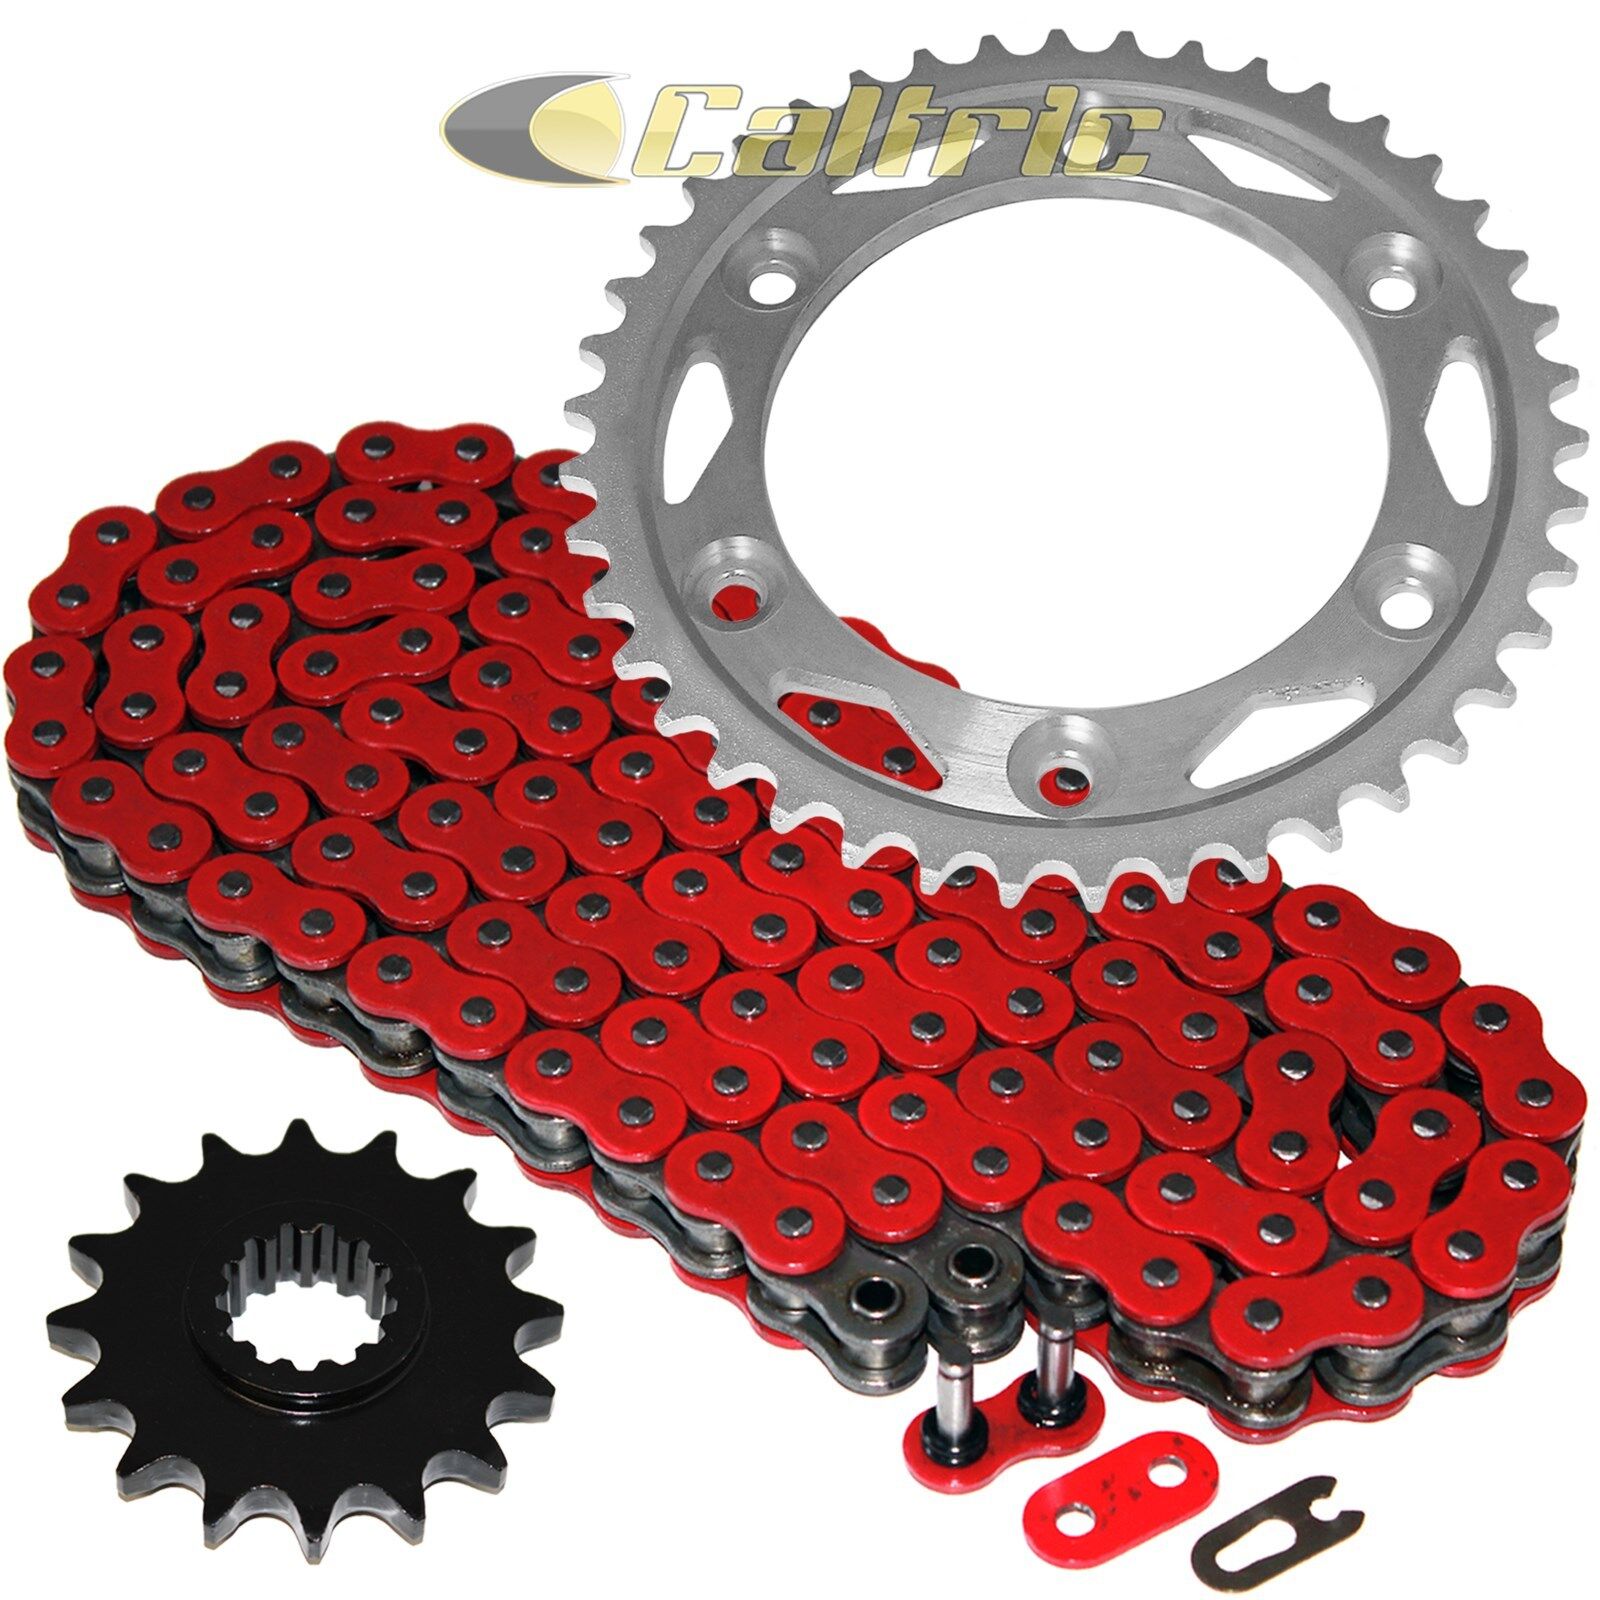 Red O-Ring Drive Chain & Sprockets for Honda CBR1000RR CBR1000RA Abs 2006-2016